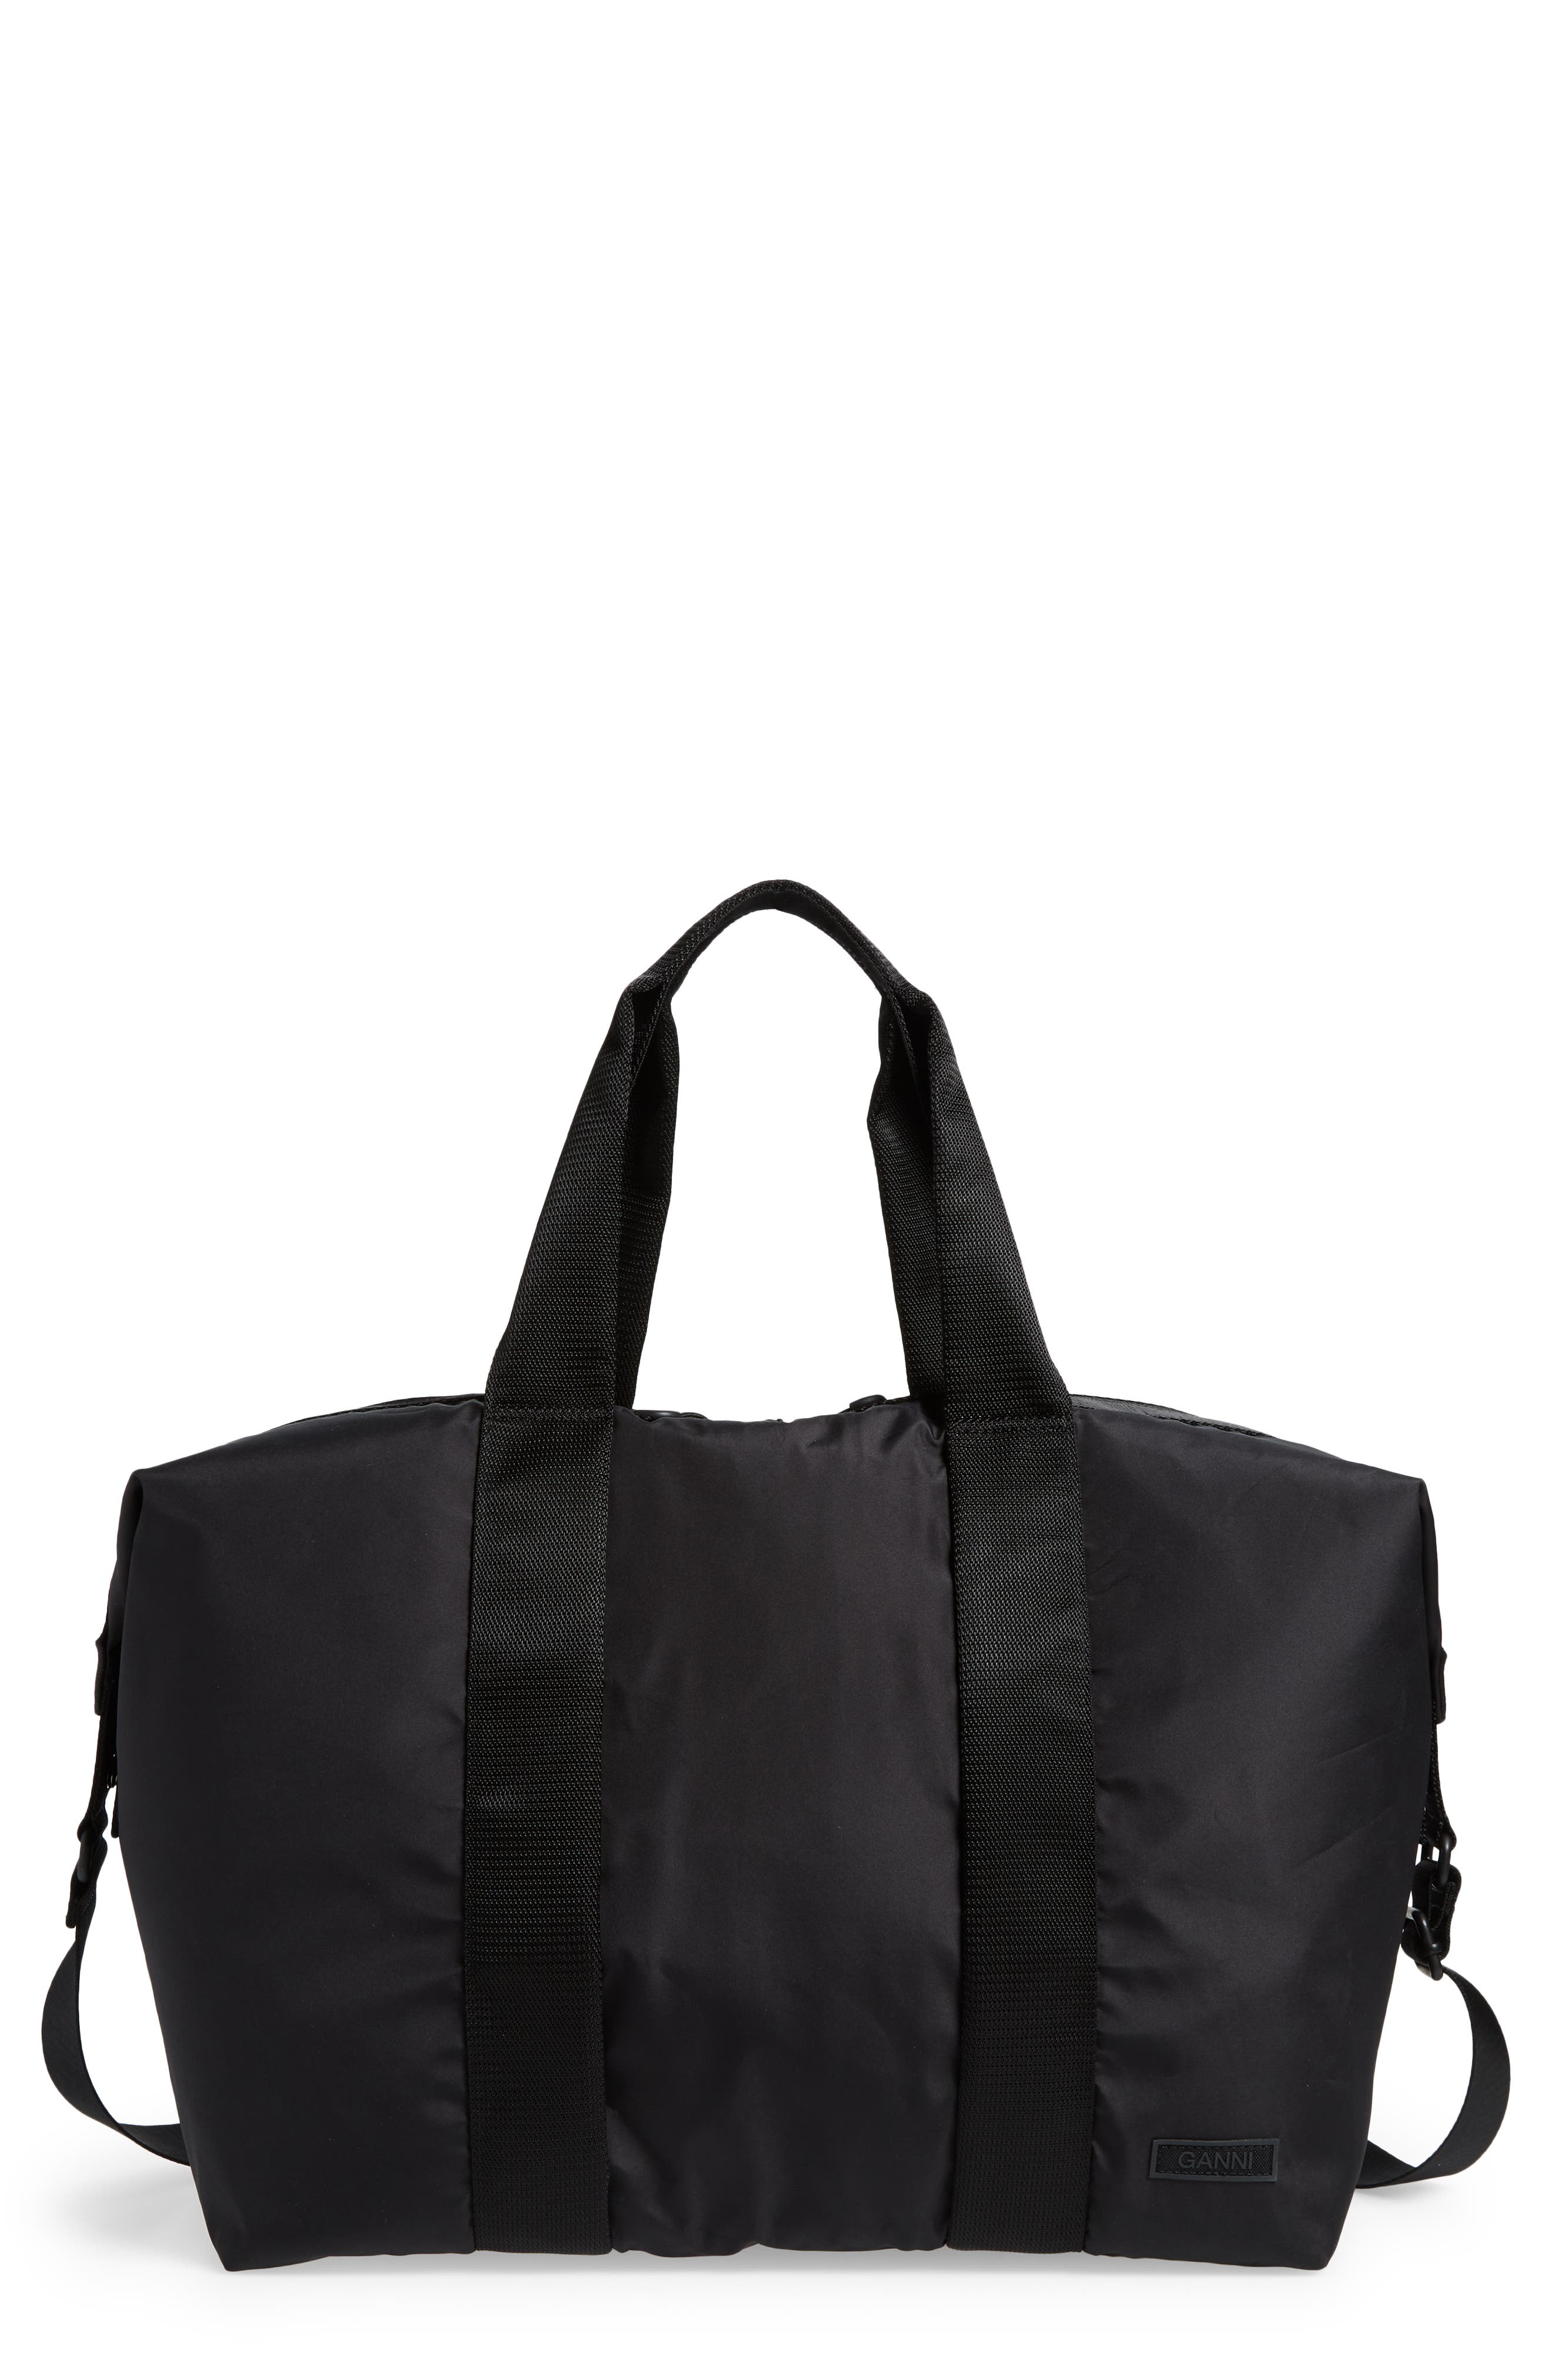 Ganni Recycled Tech Weekend Duffle Bag in Black at Nordstrom